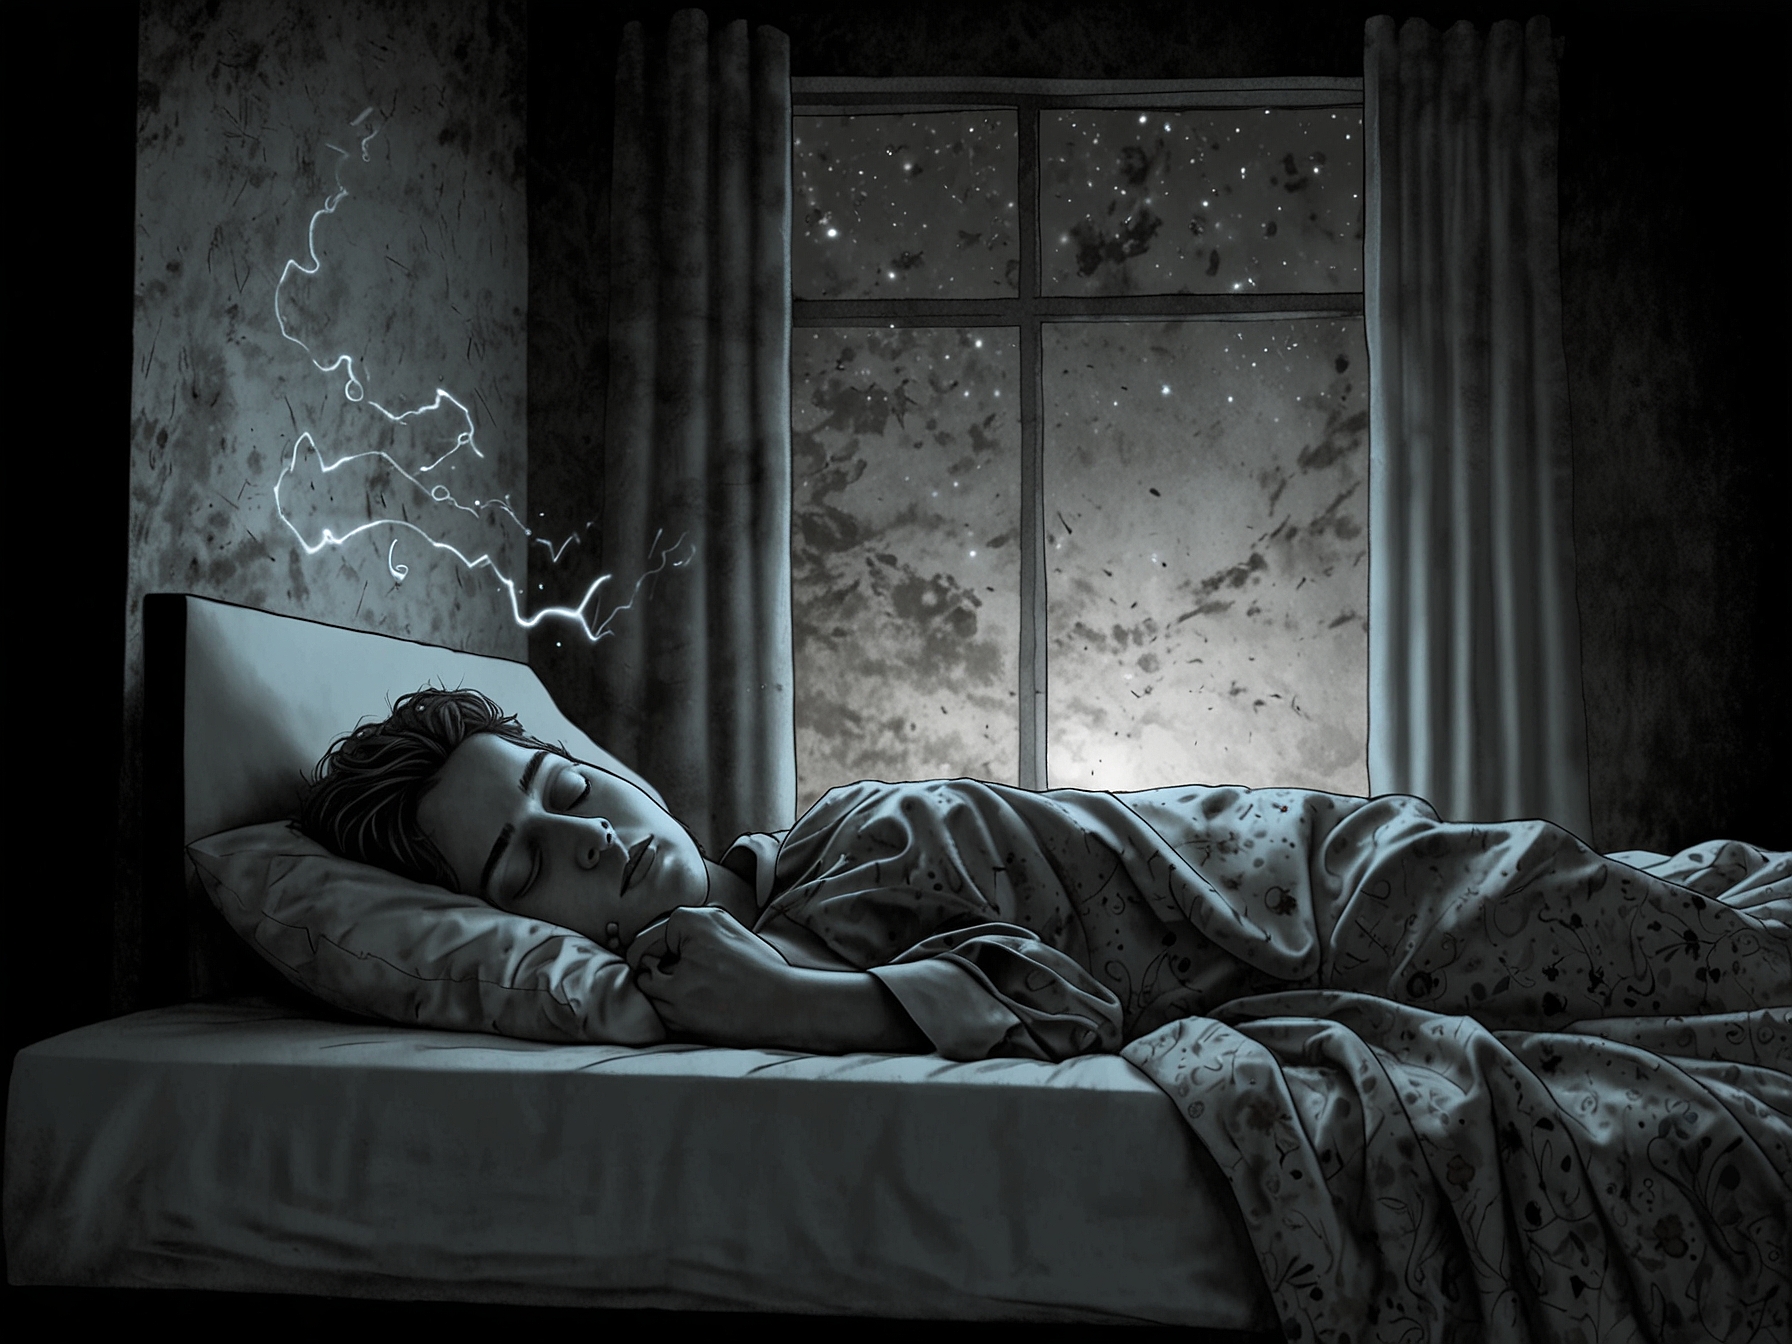 An image illustrating a person lying awake in bed, staring at the ceiling in frustration, capturing the essence of the author's struggle with insomnia before undergoing CBT-i.